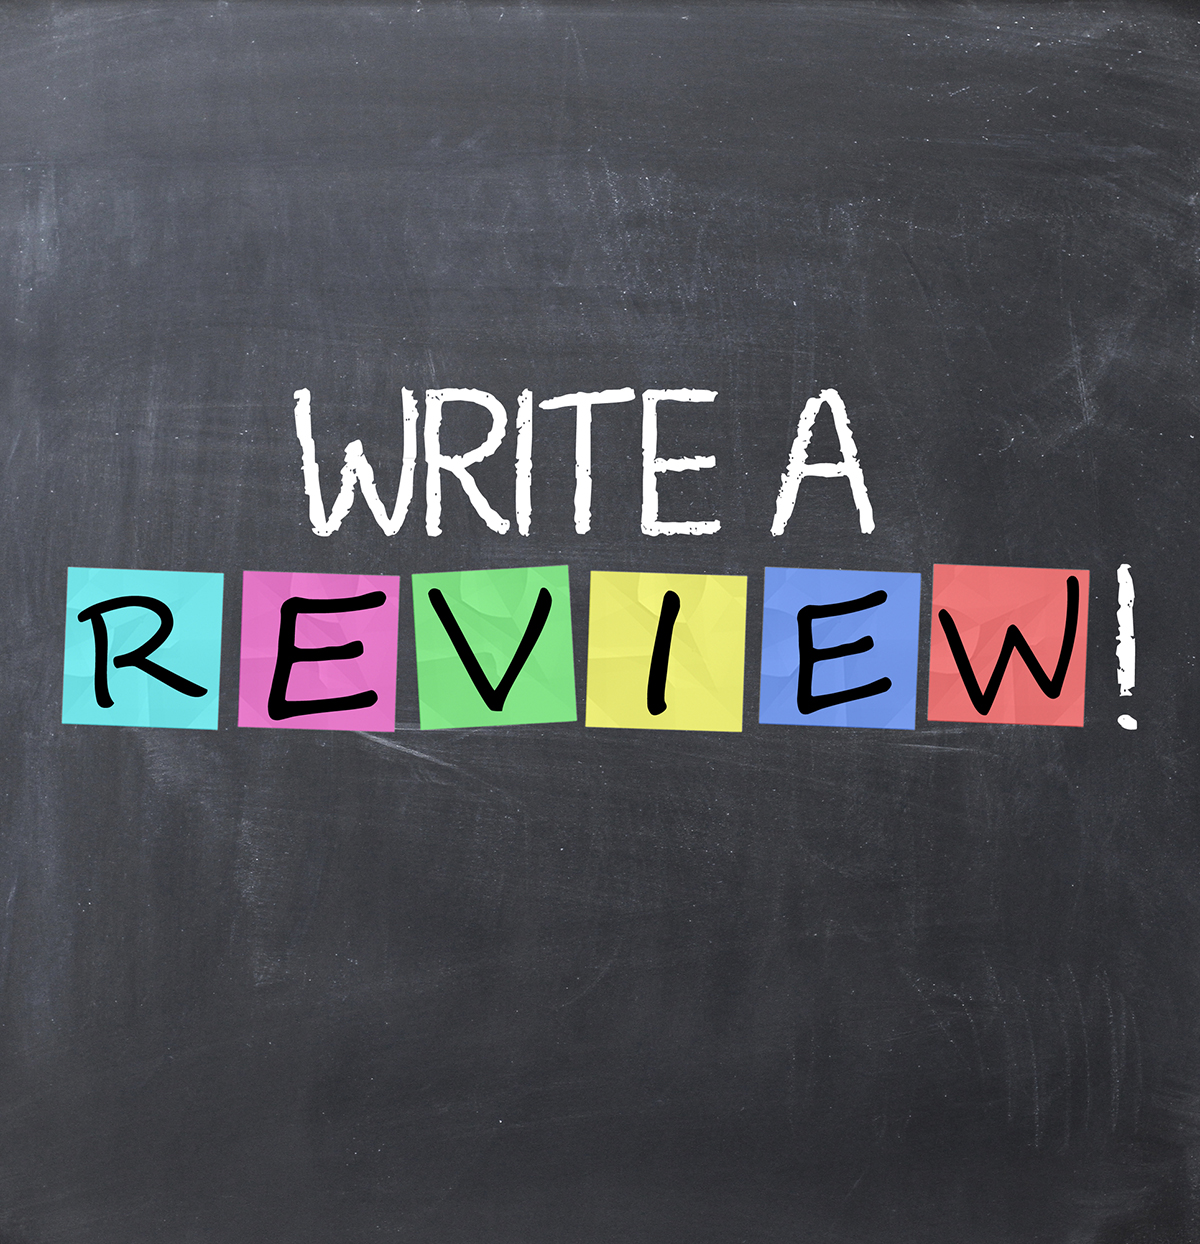 Ways to increase patient reviews in dermatology marketing: the sentence "write a review" is written on a chalkboard with the word review in all caps and rainbow hues